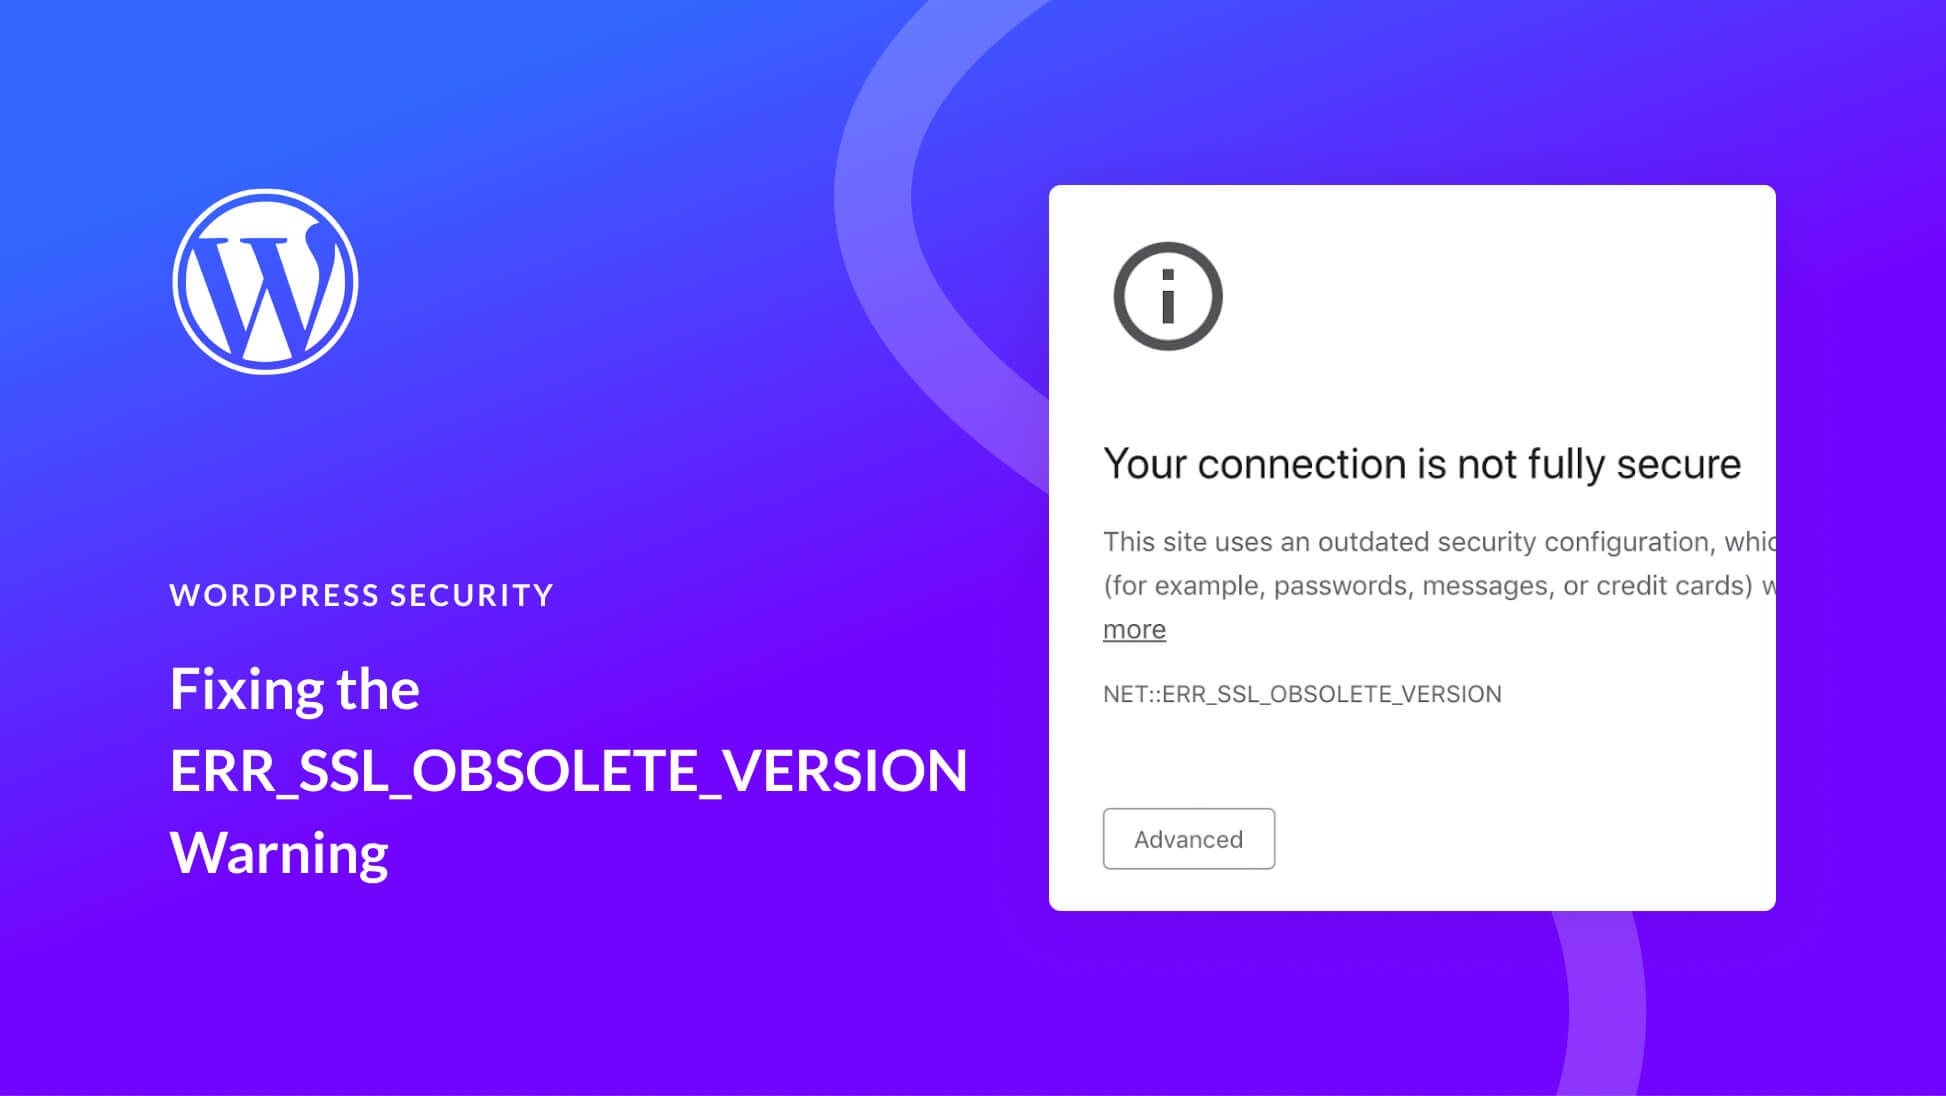 How to Fix ERR_SSL_OBSOLETE_VERSION Warning in Chrome